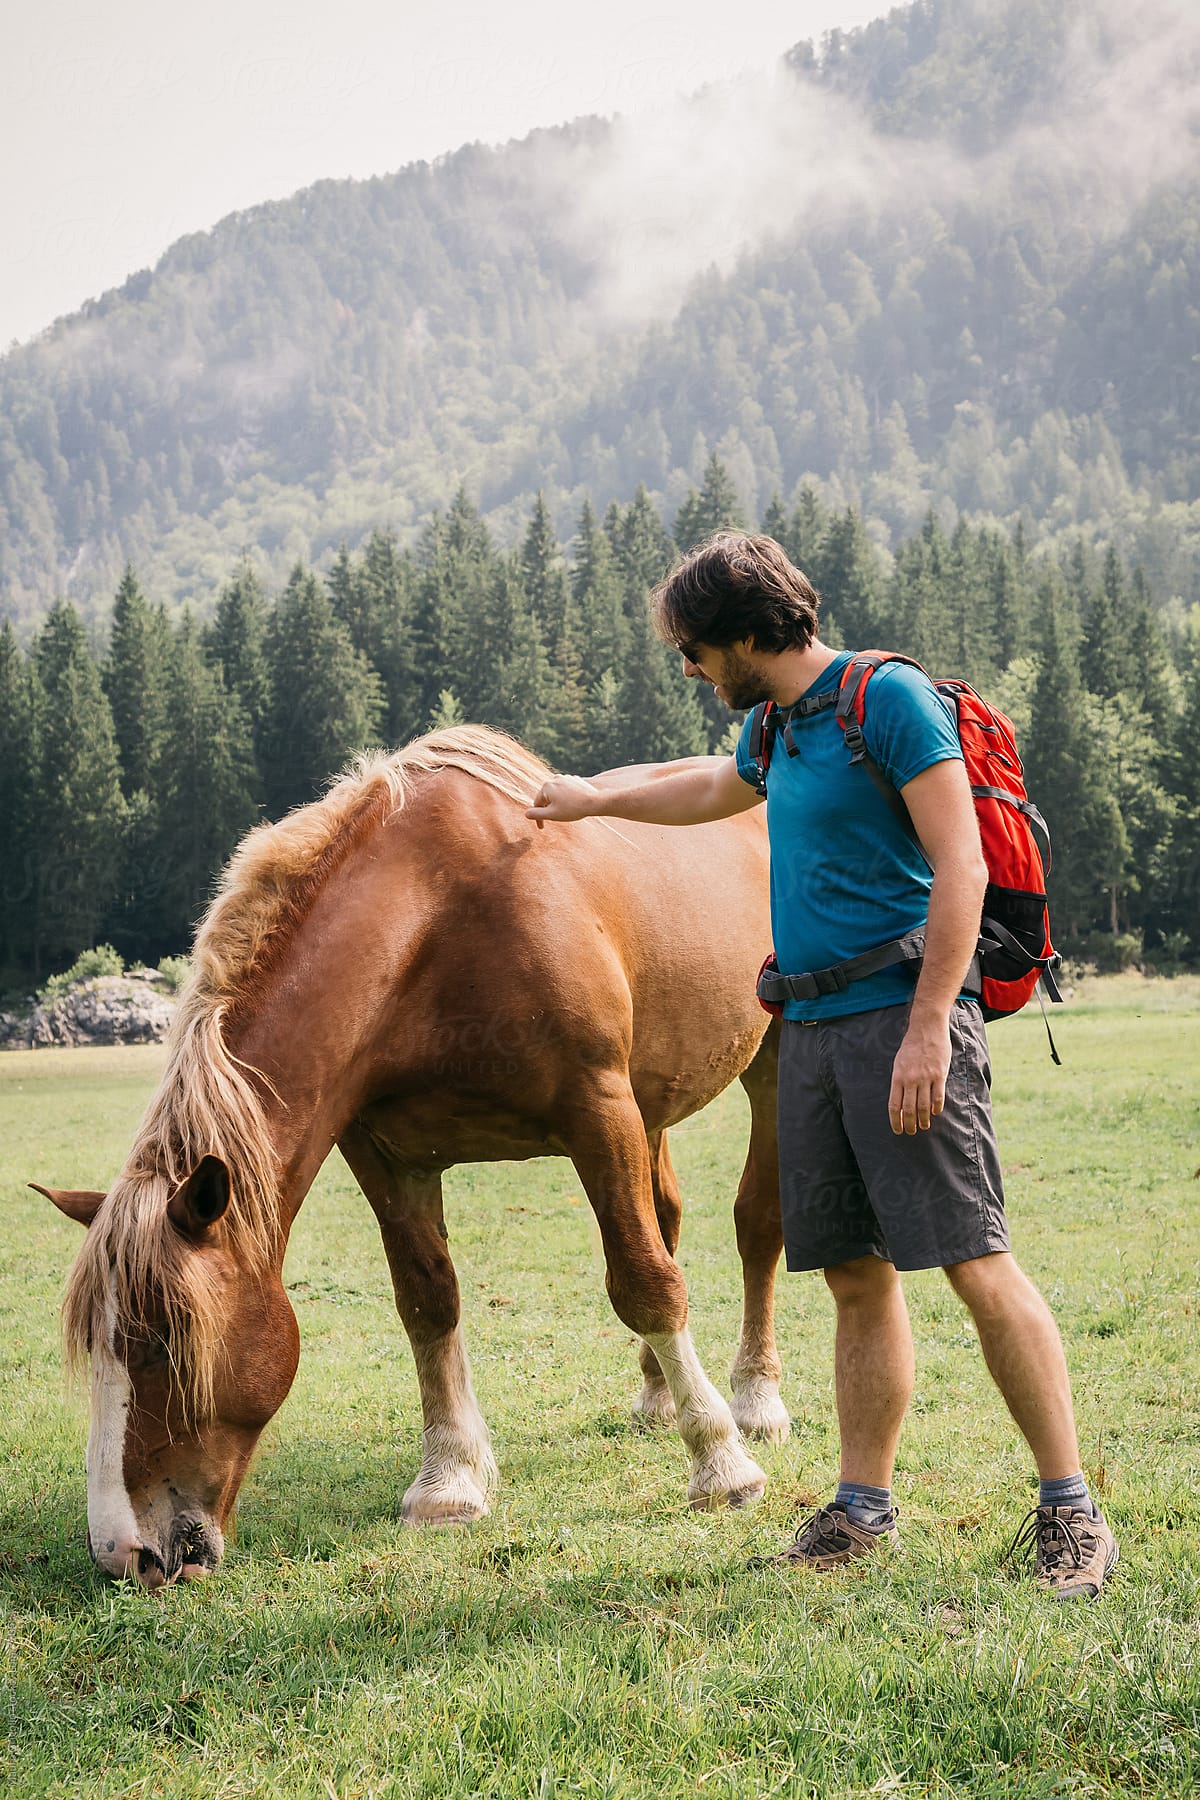 Man strokes a free horse in nature